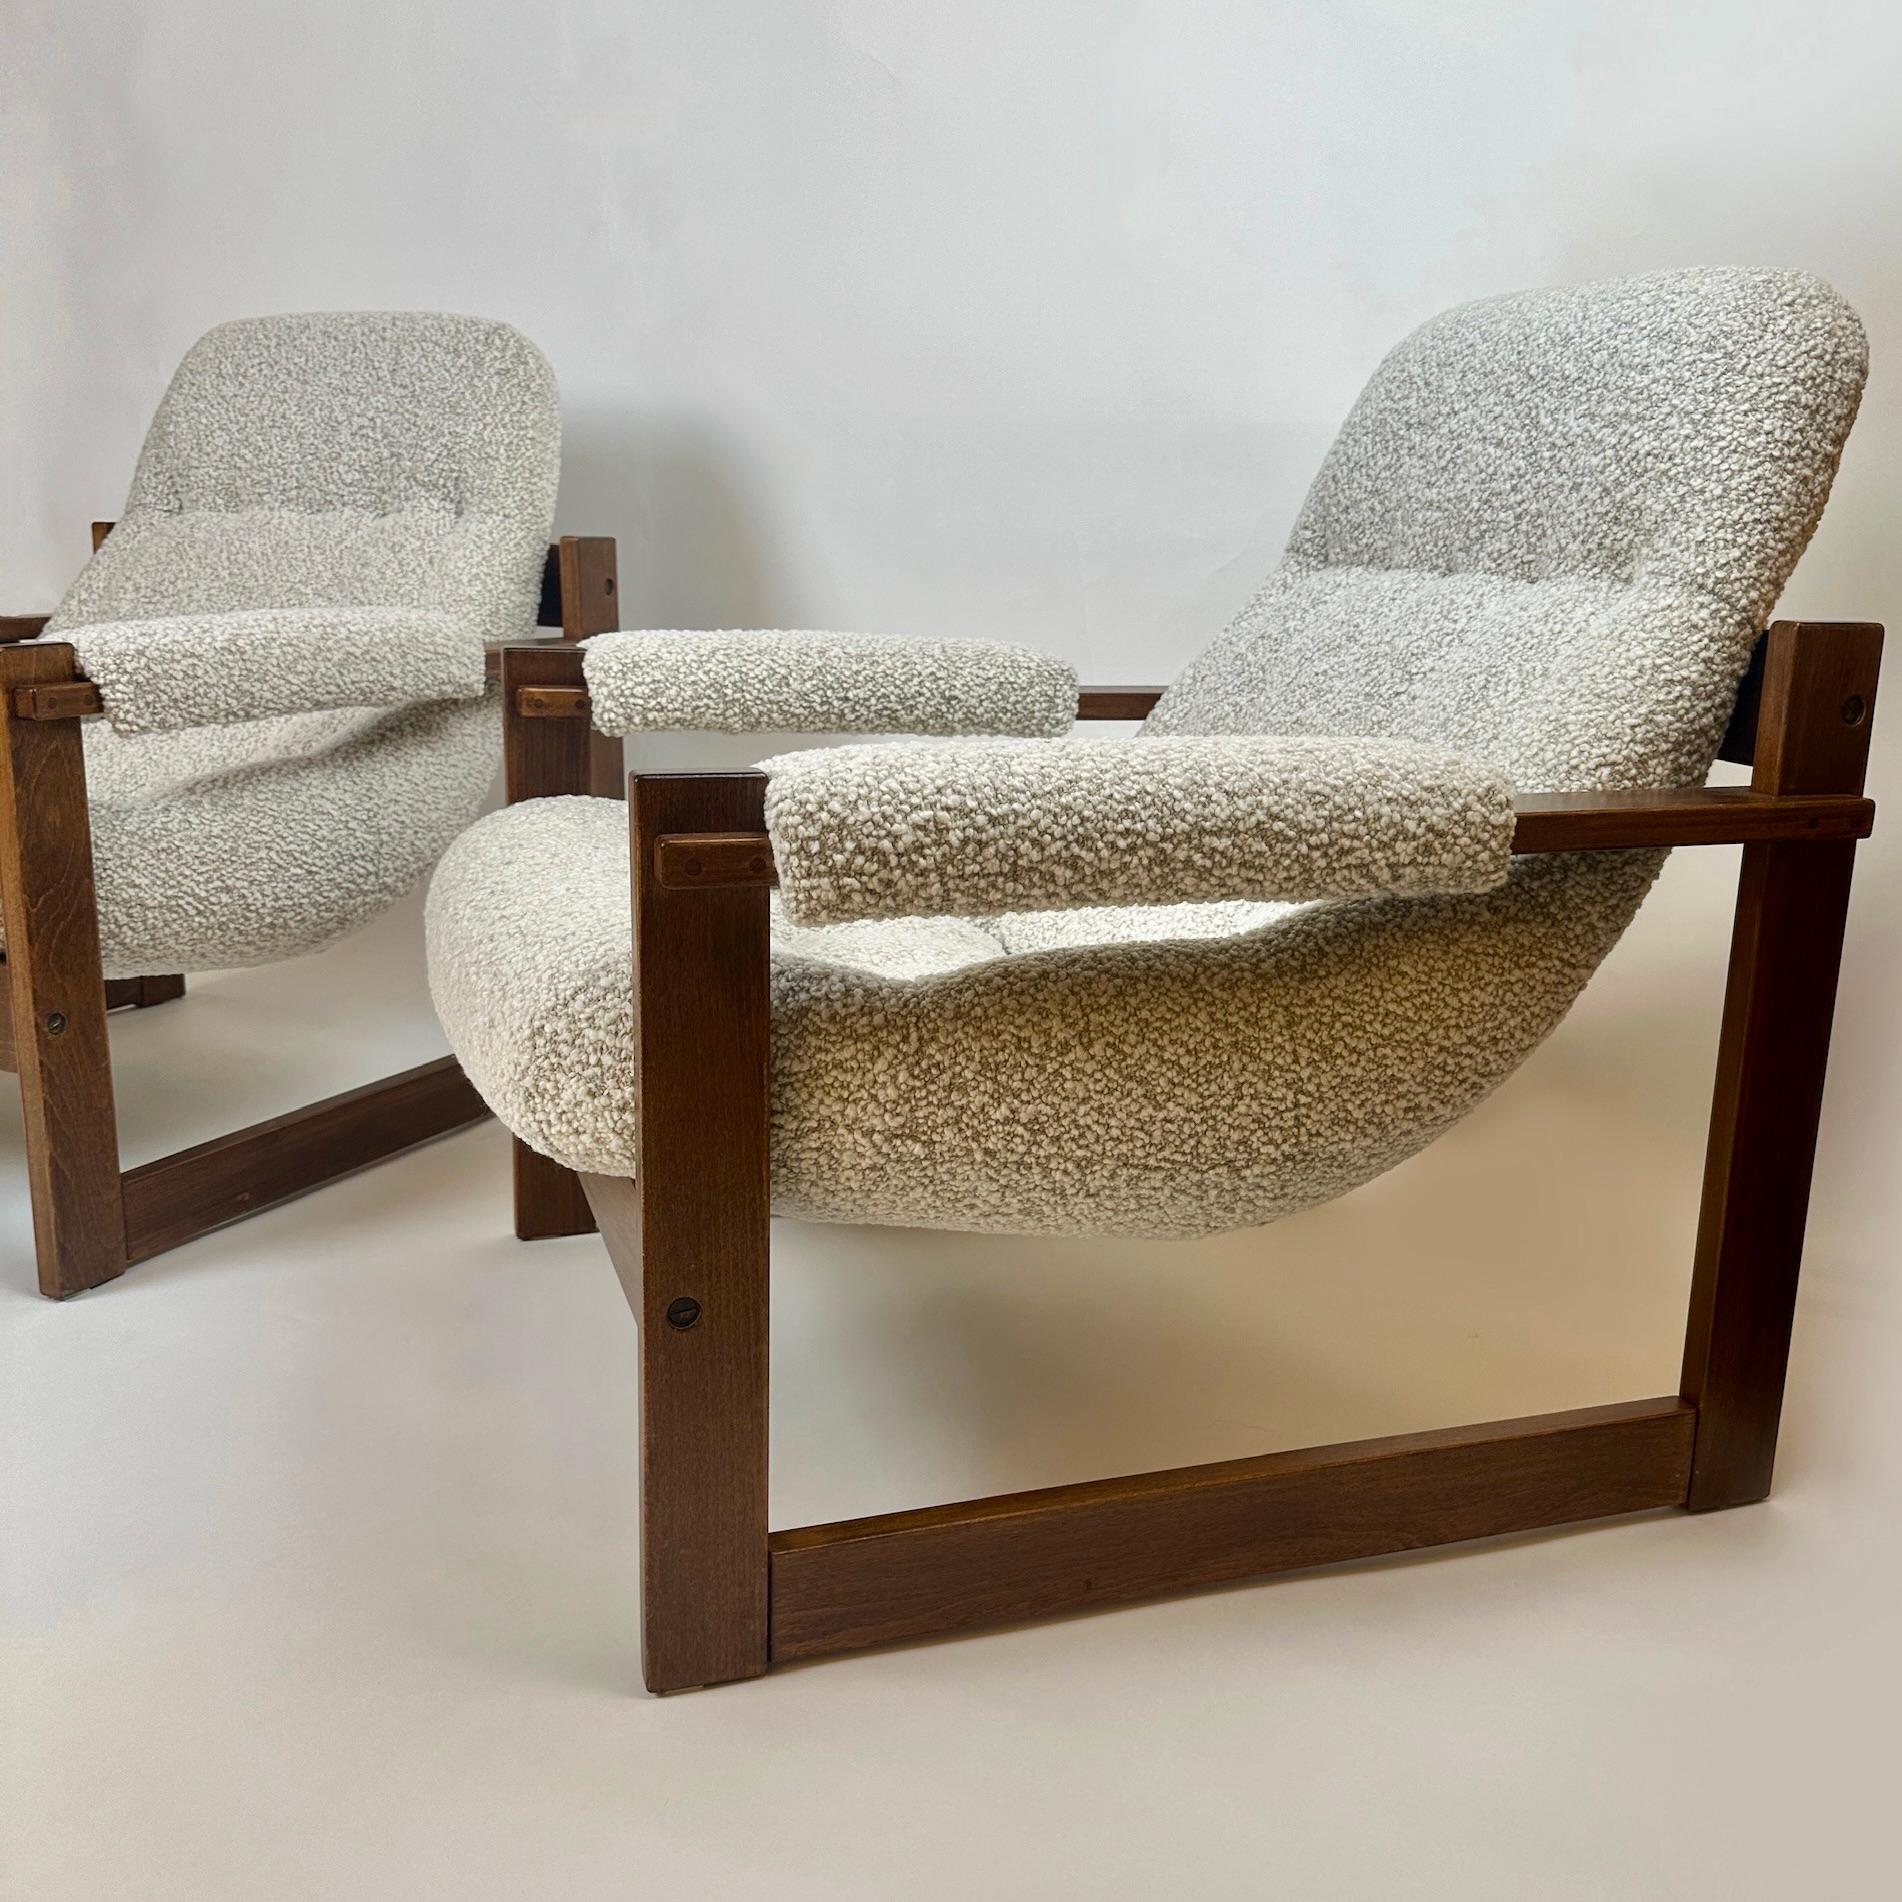 Late 20th Century Pair of Brazilian Wood & Beige Wool Bouclè MP-163 Earth Chairs by Percival Lafer For Sale